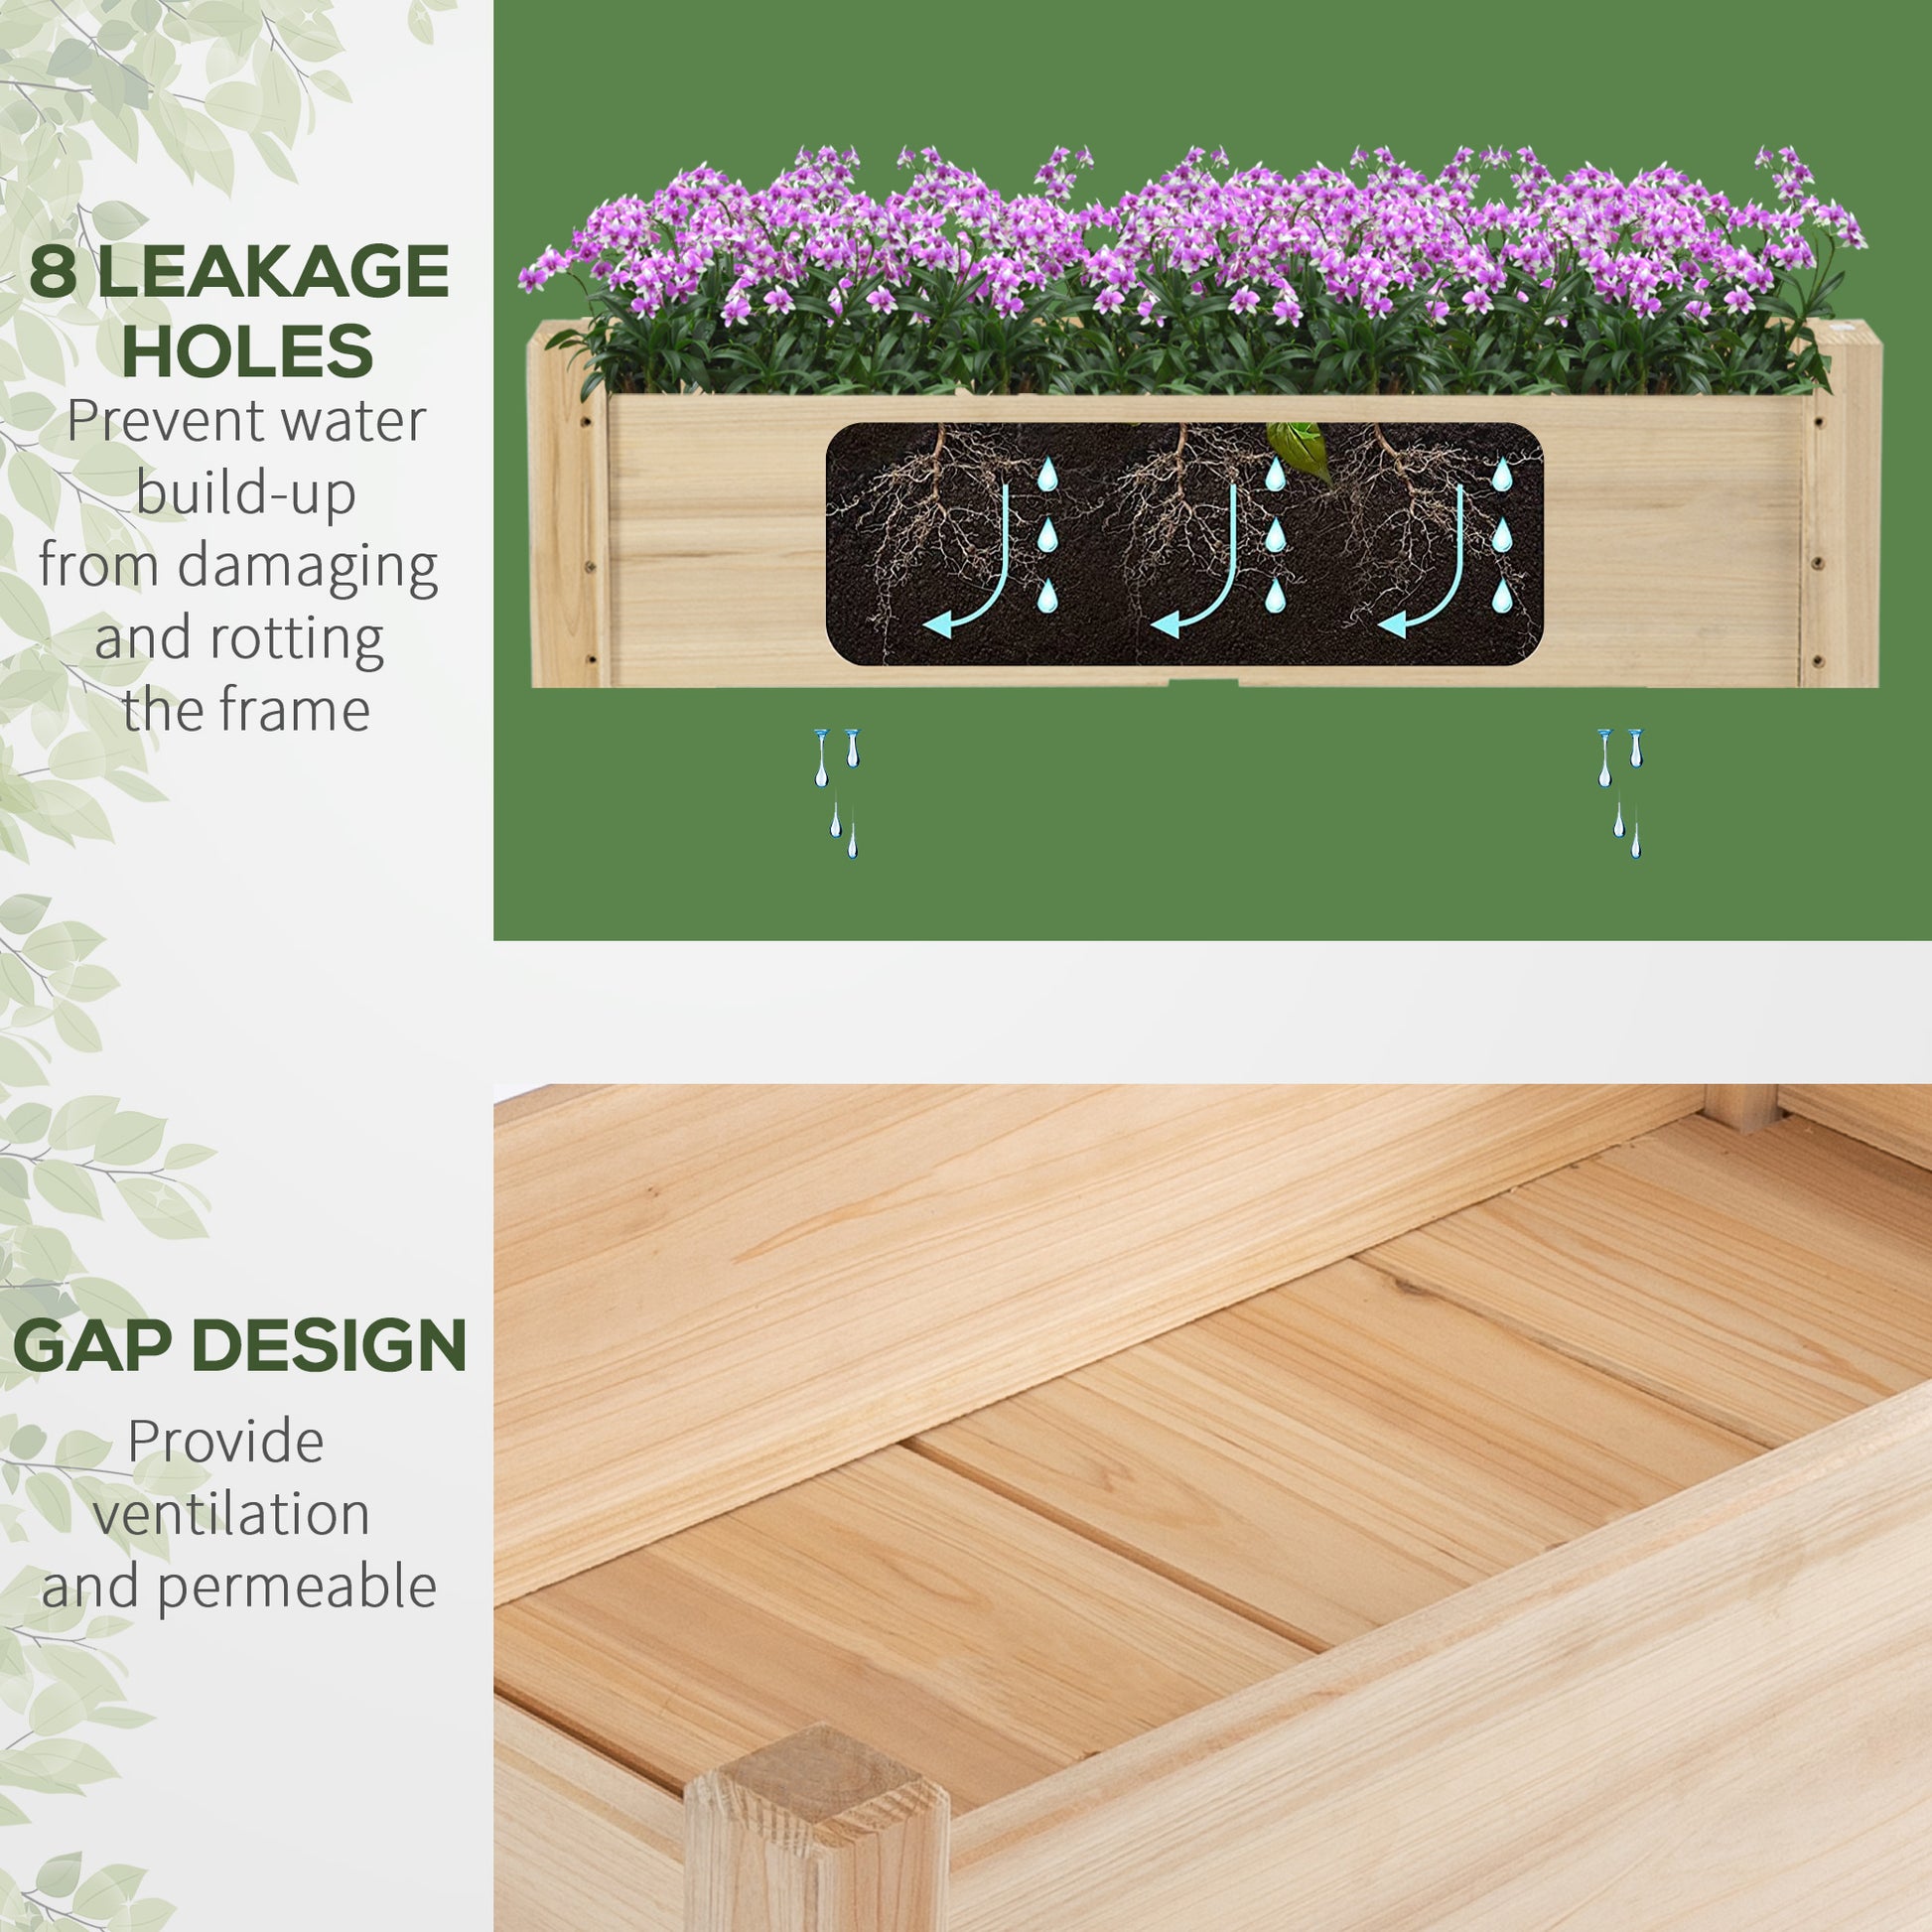 34"x34"x28" 2-Tier Raised Garden Bed Wooden Planter Box for Backyard, Patio to Grow Vegetables, Herbs, and Flowers at Gallery Canada